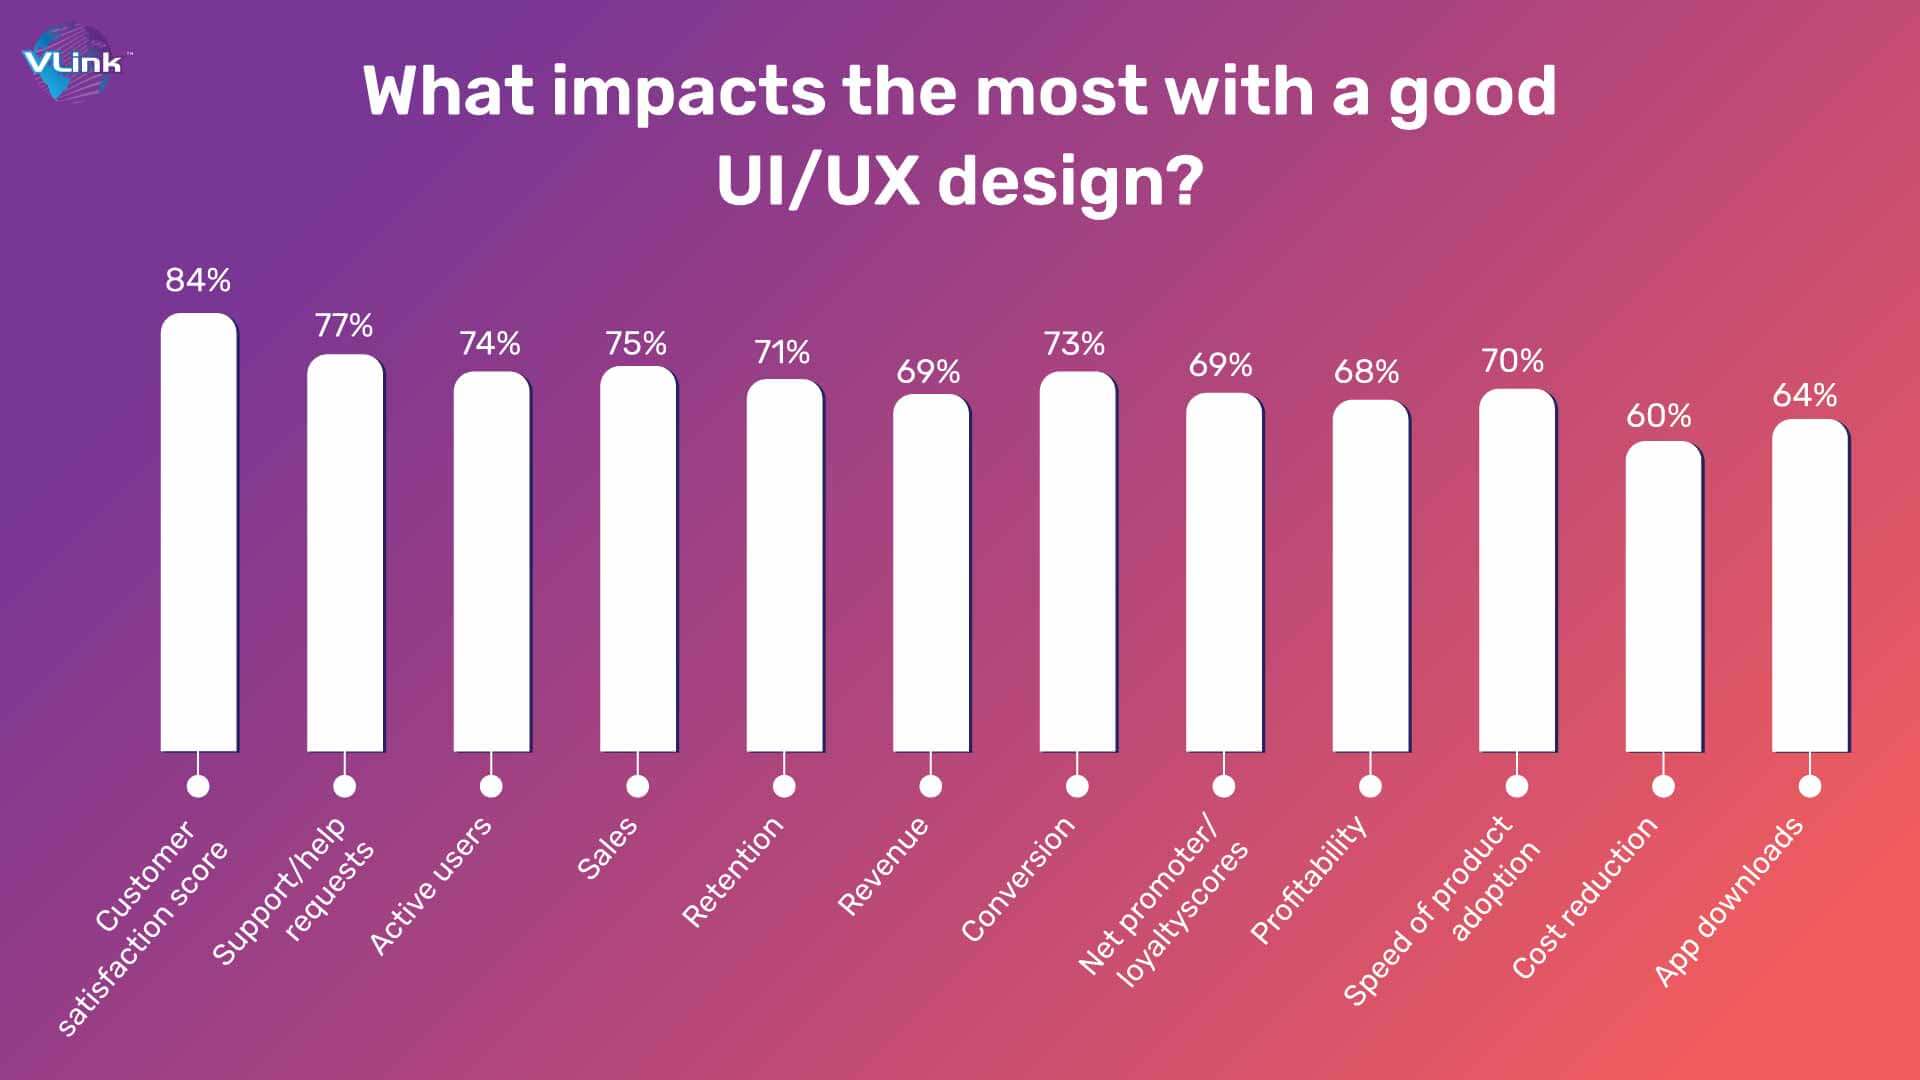 What impacts the most with a good UIUX design